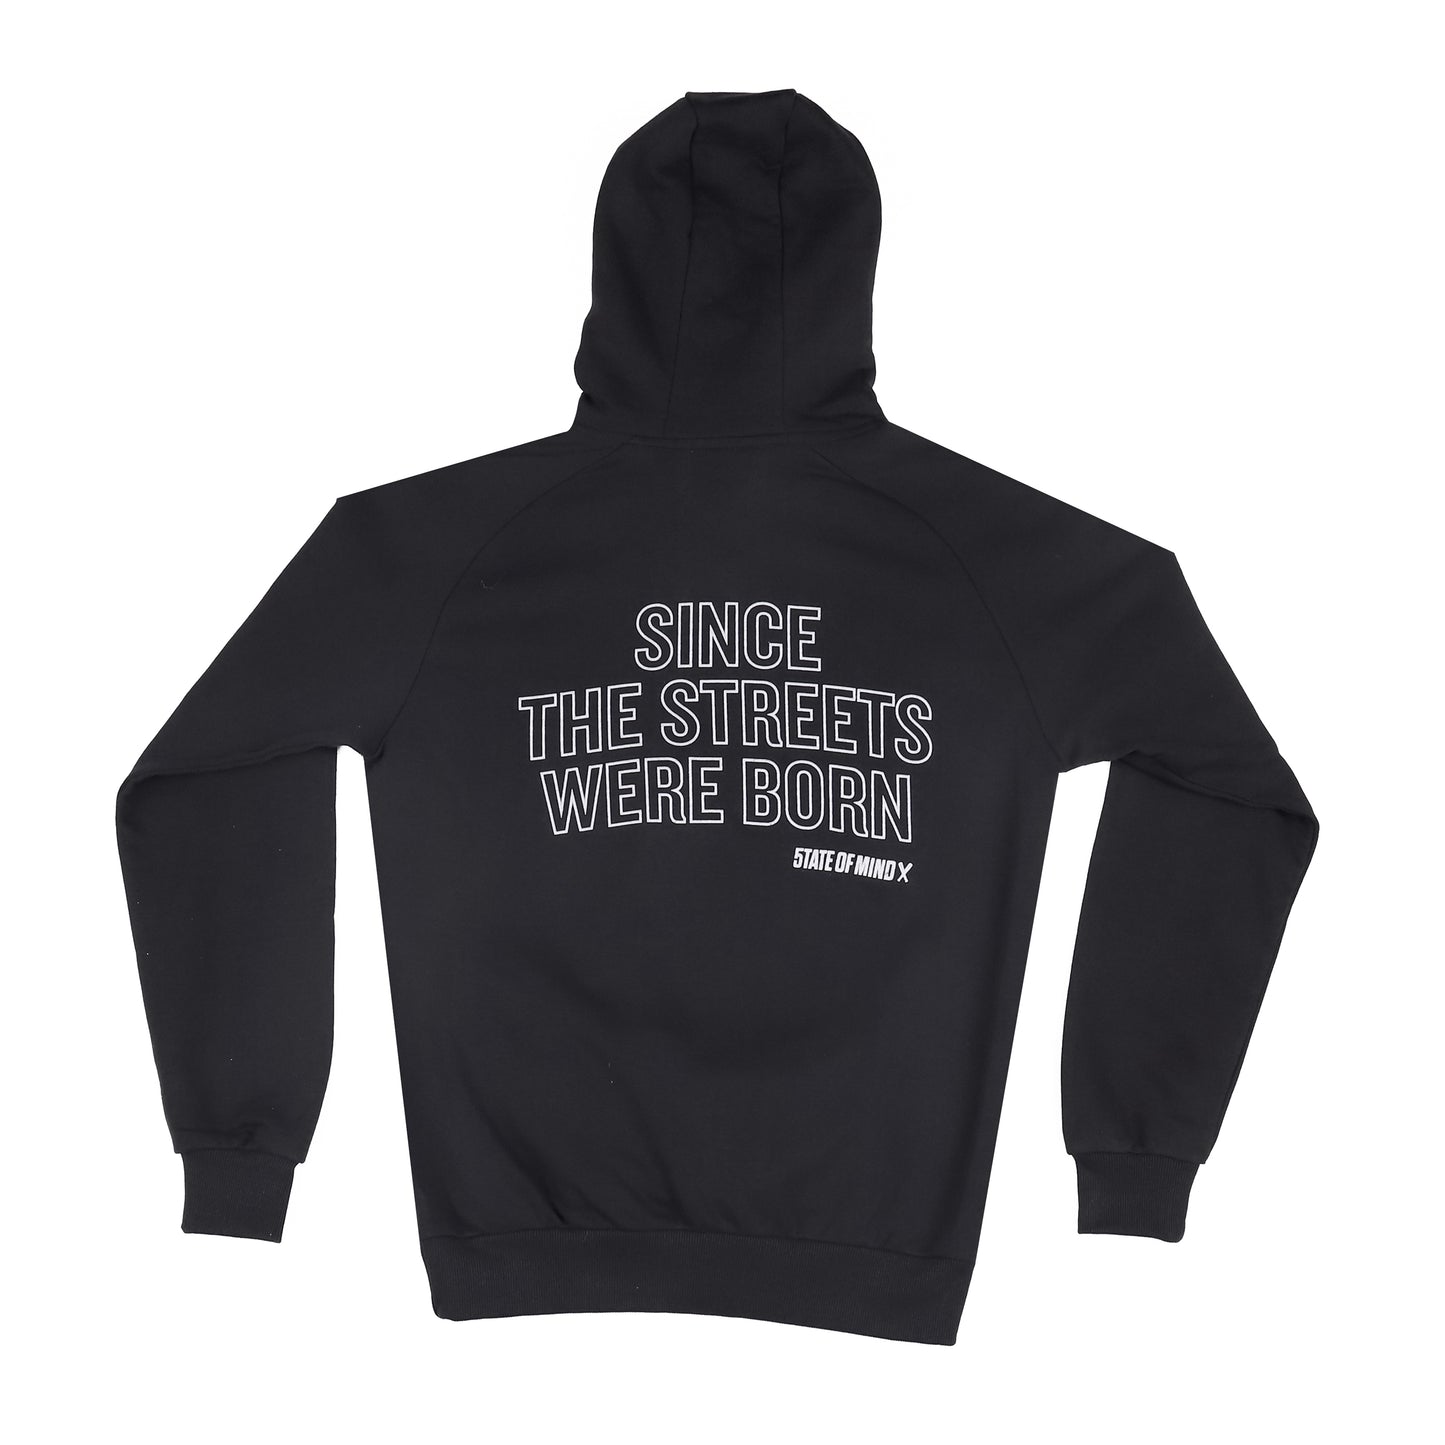 "SINCE THE STREETS" black reflective hoodie